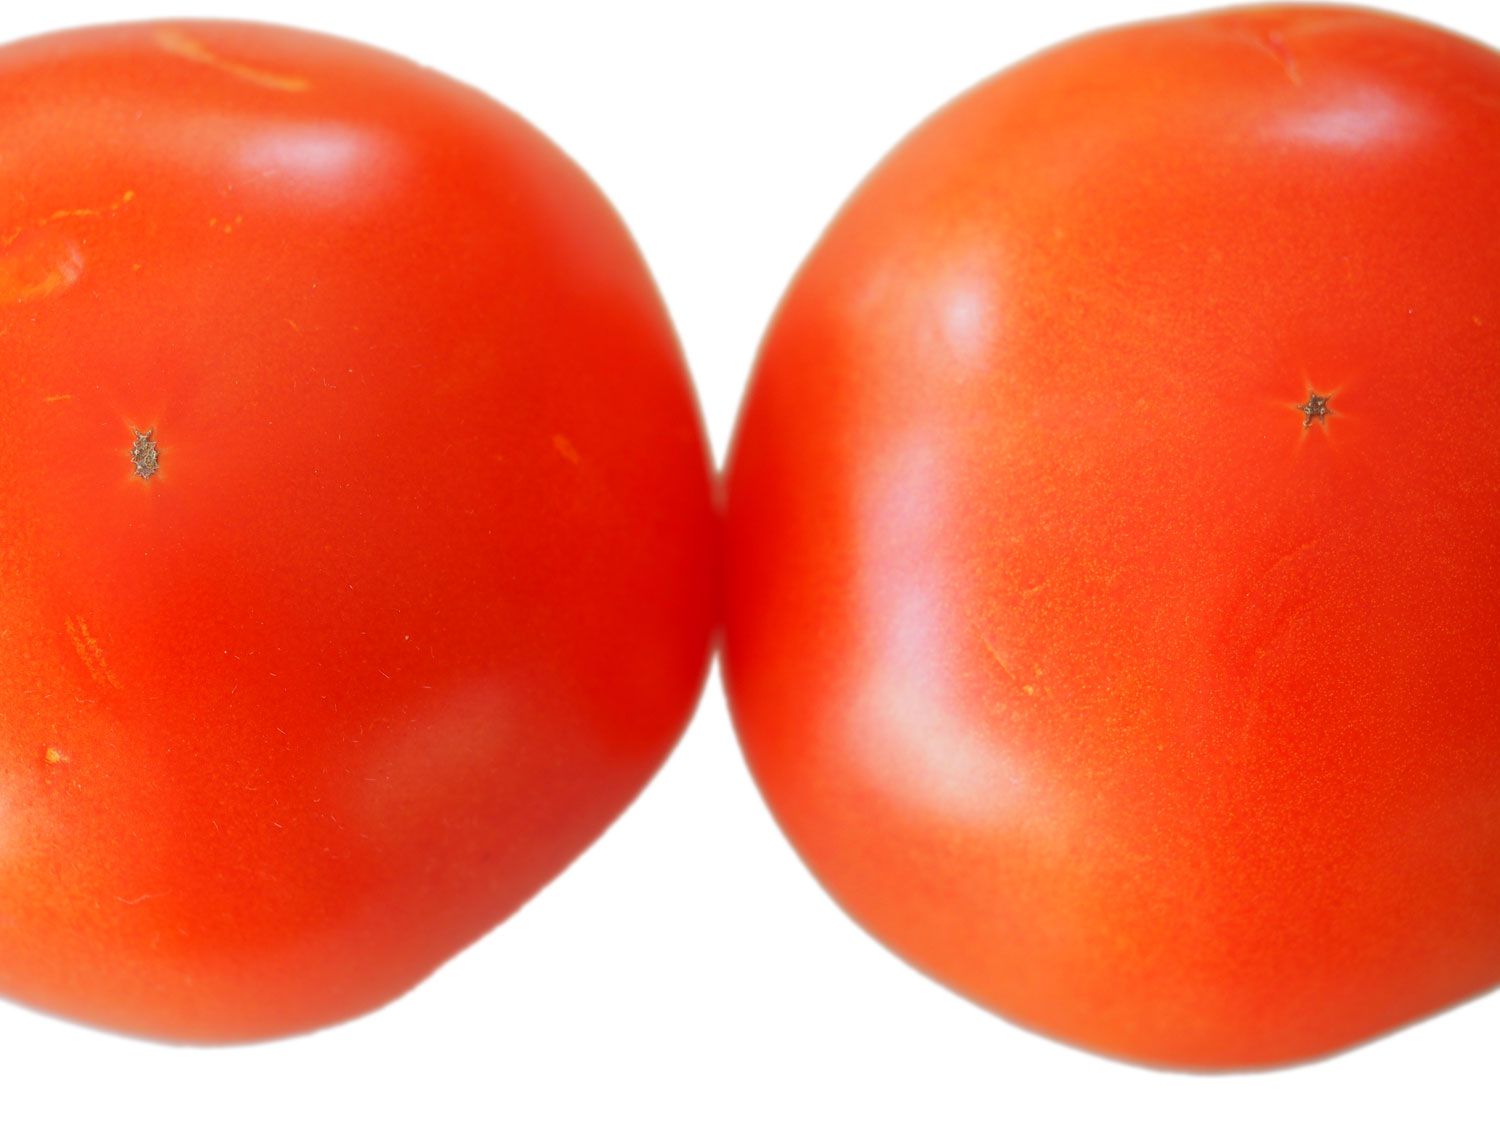 Overhead of two red and plump tomatoes resting side by side on a white surface. After 24 hours, the counter tomato, at left, was redder than its refrigerator counterpart.